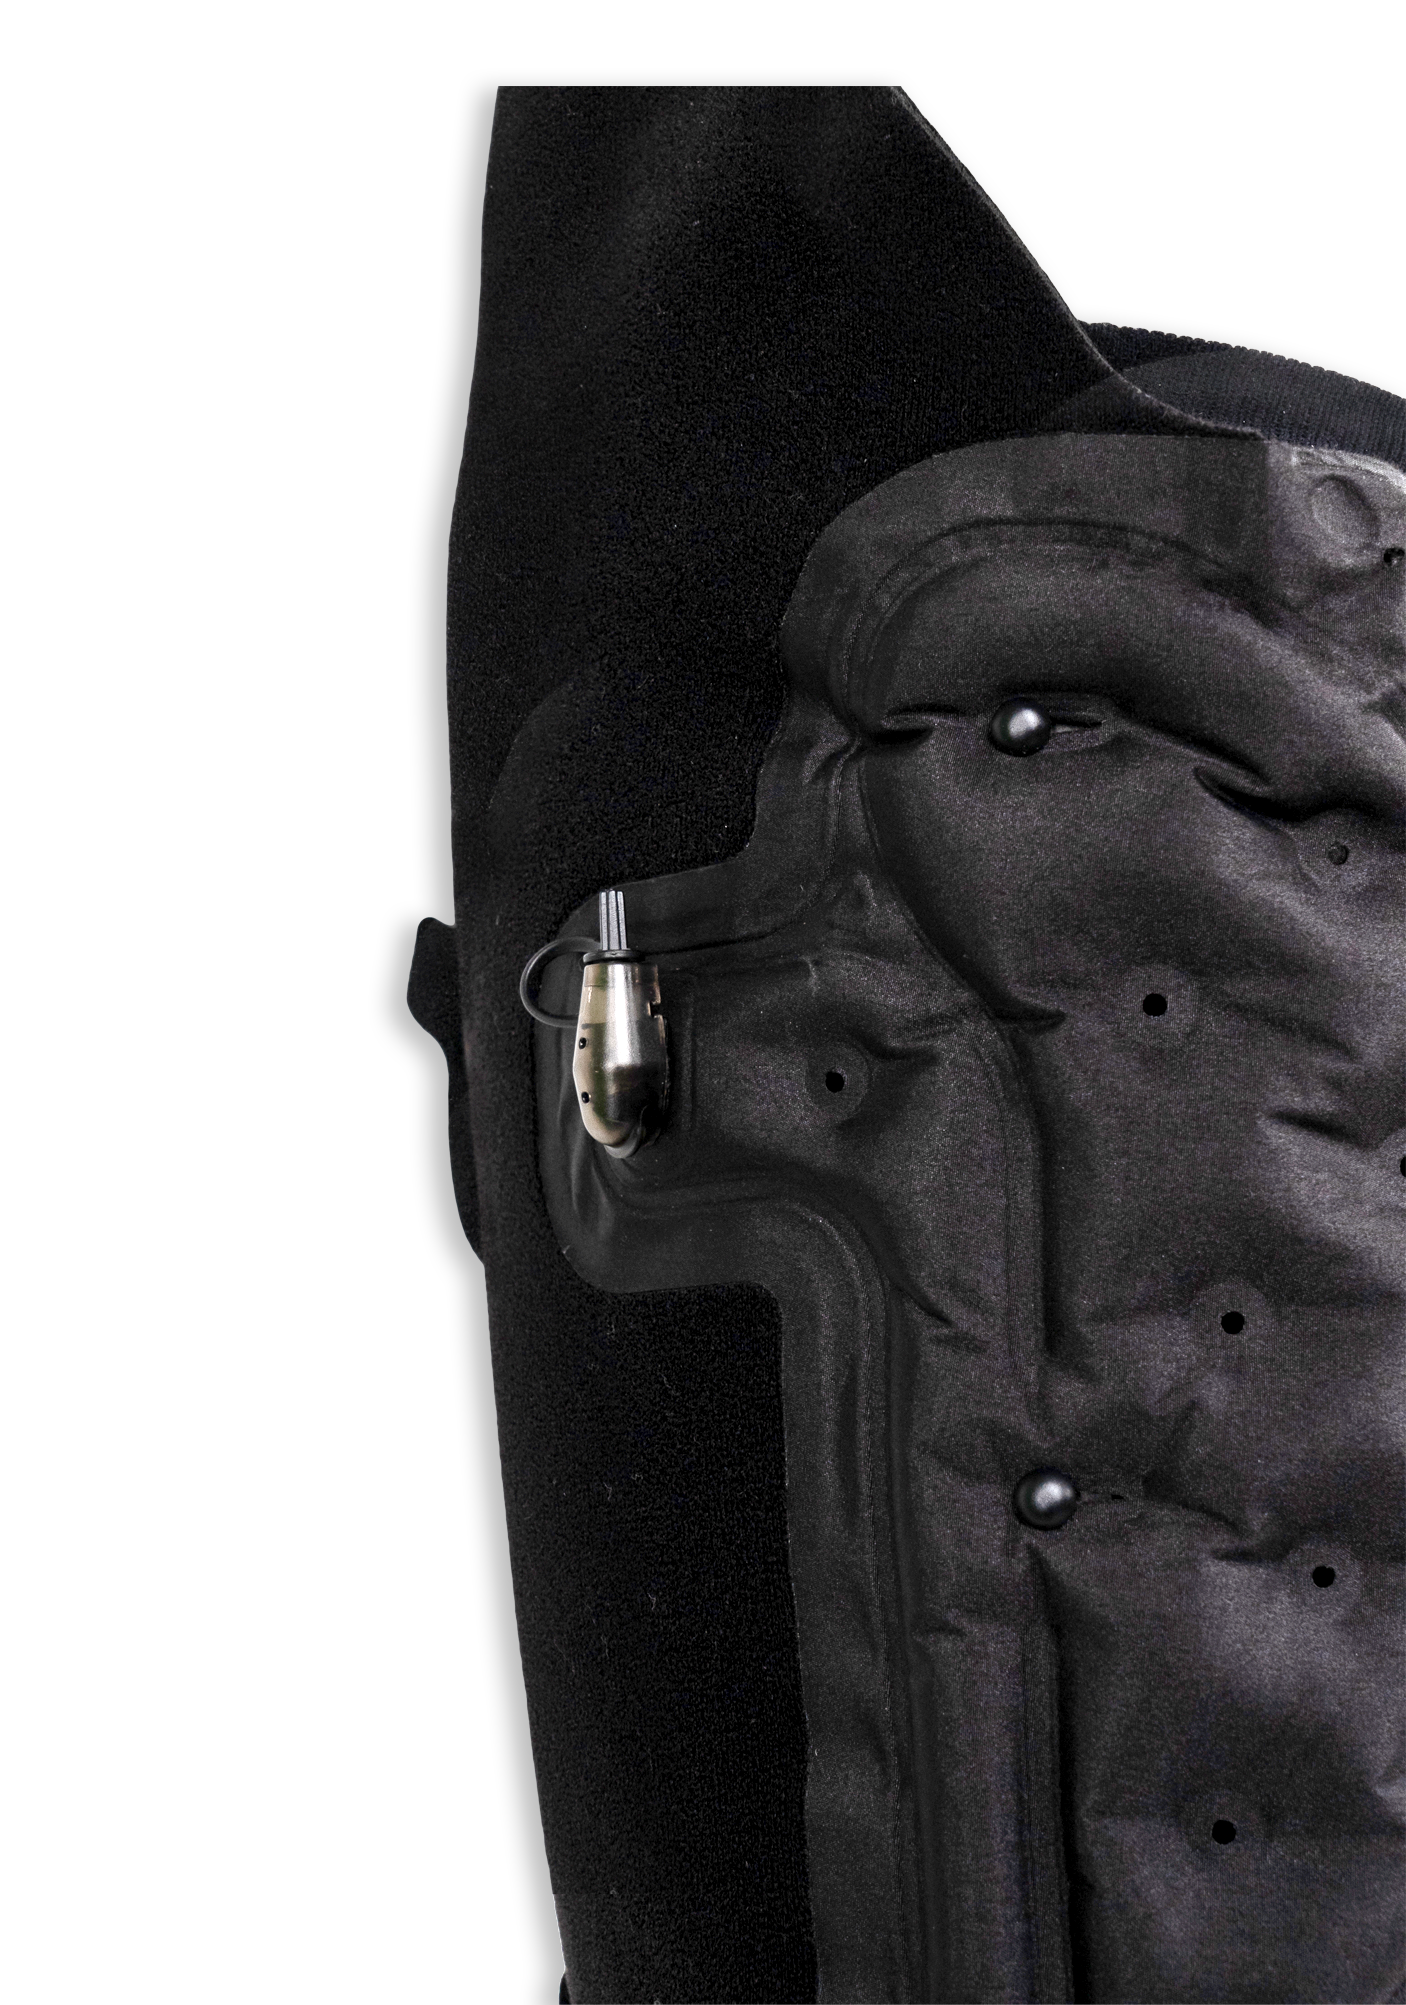 close up aero-wrap valve on thigh sleeve for swelling management on upper leg